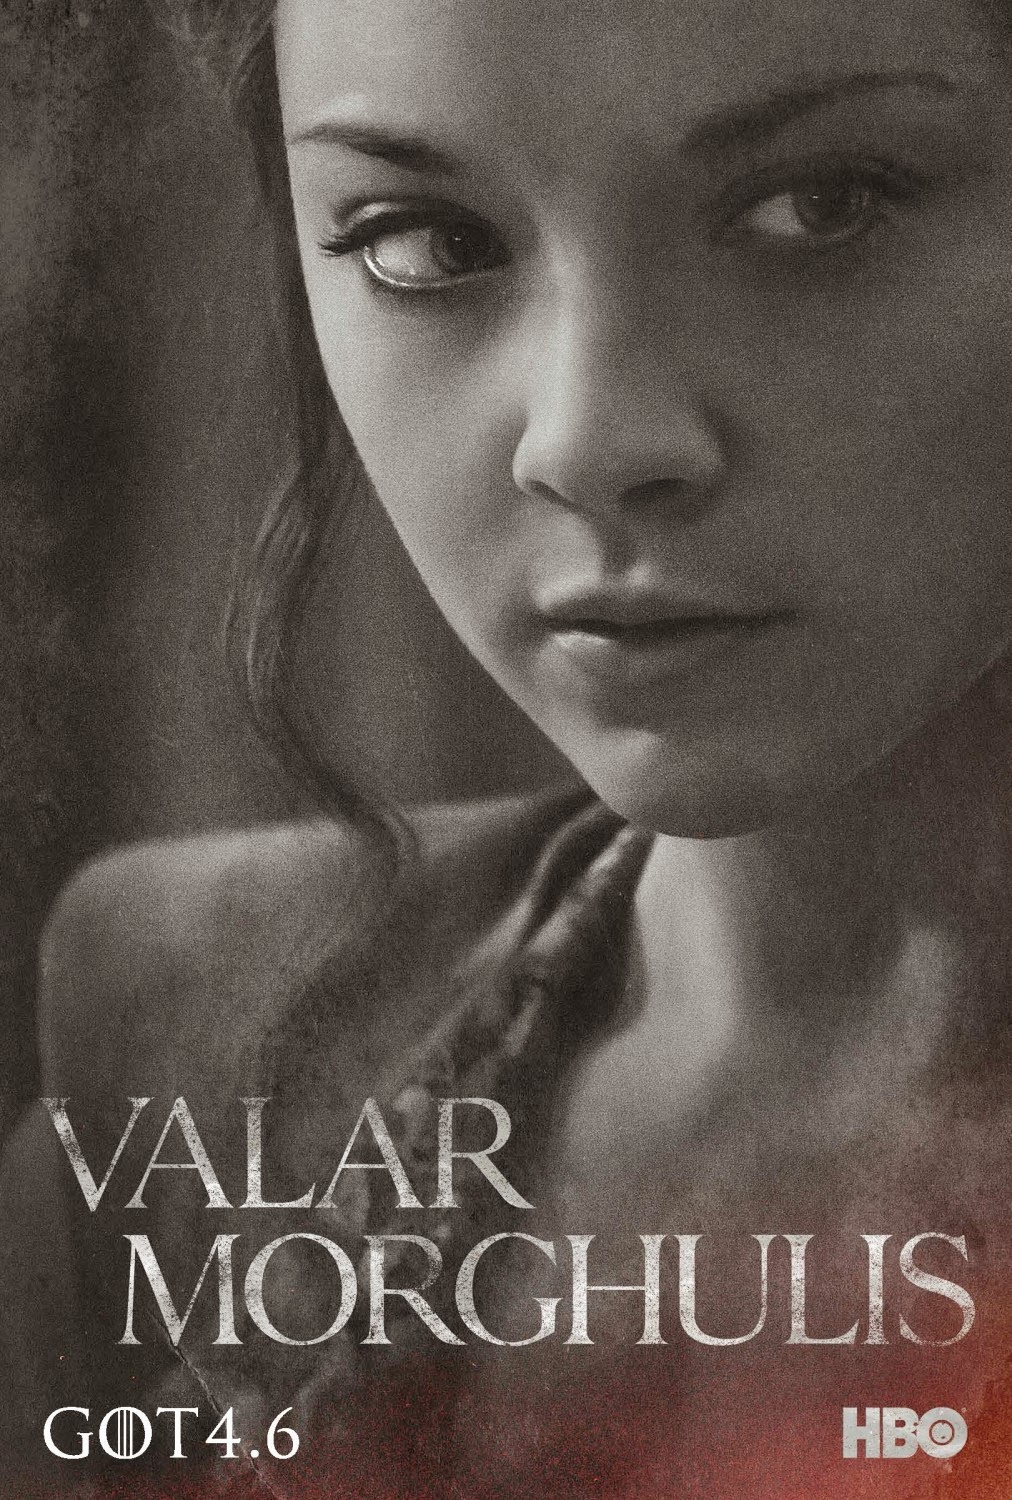 Game of Thrones Season 4 Valar Morghulis Teaser Character Television Poster Set - Natalie Dormer as Margaery Tyrell